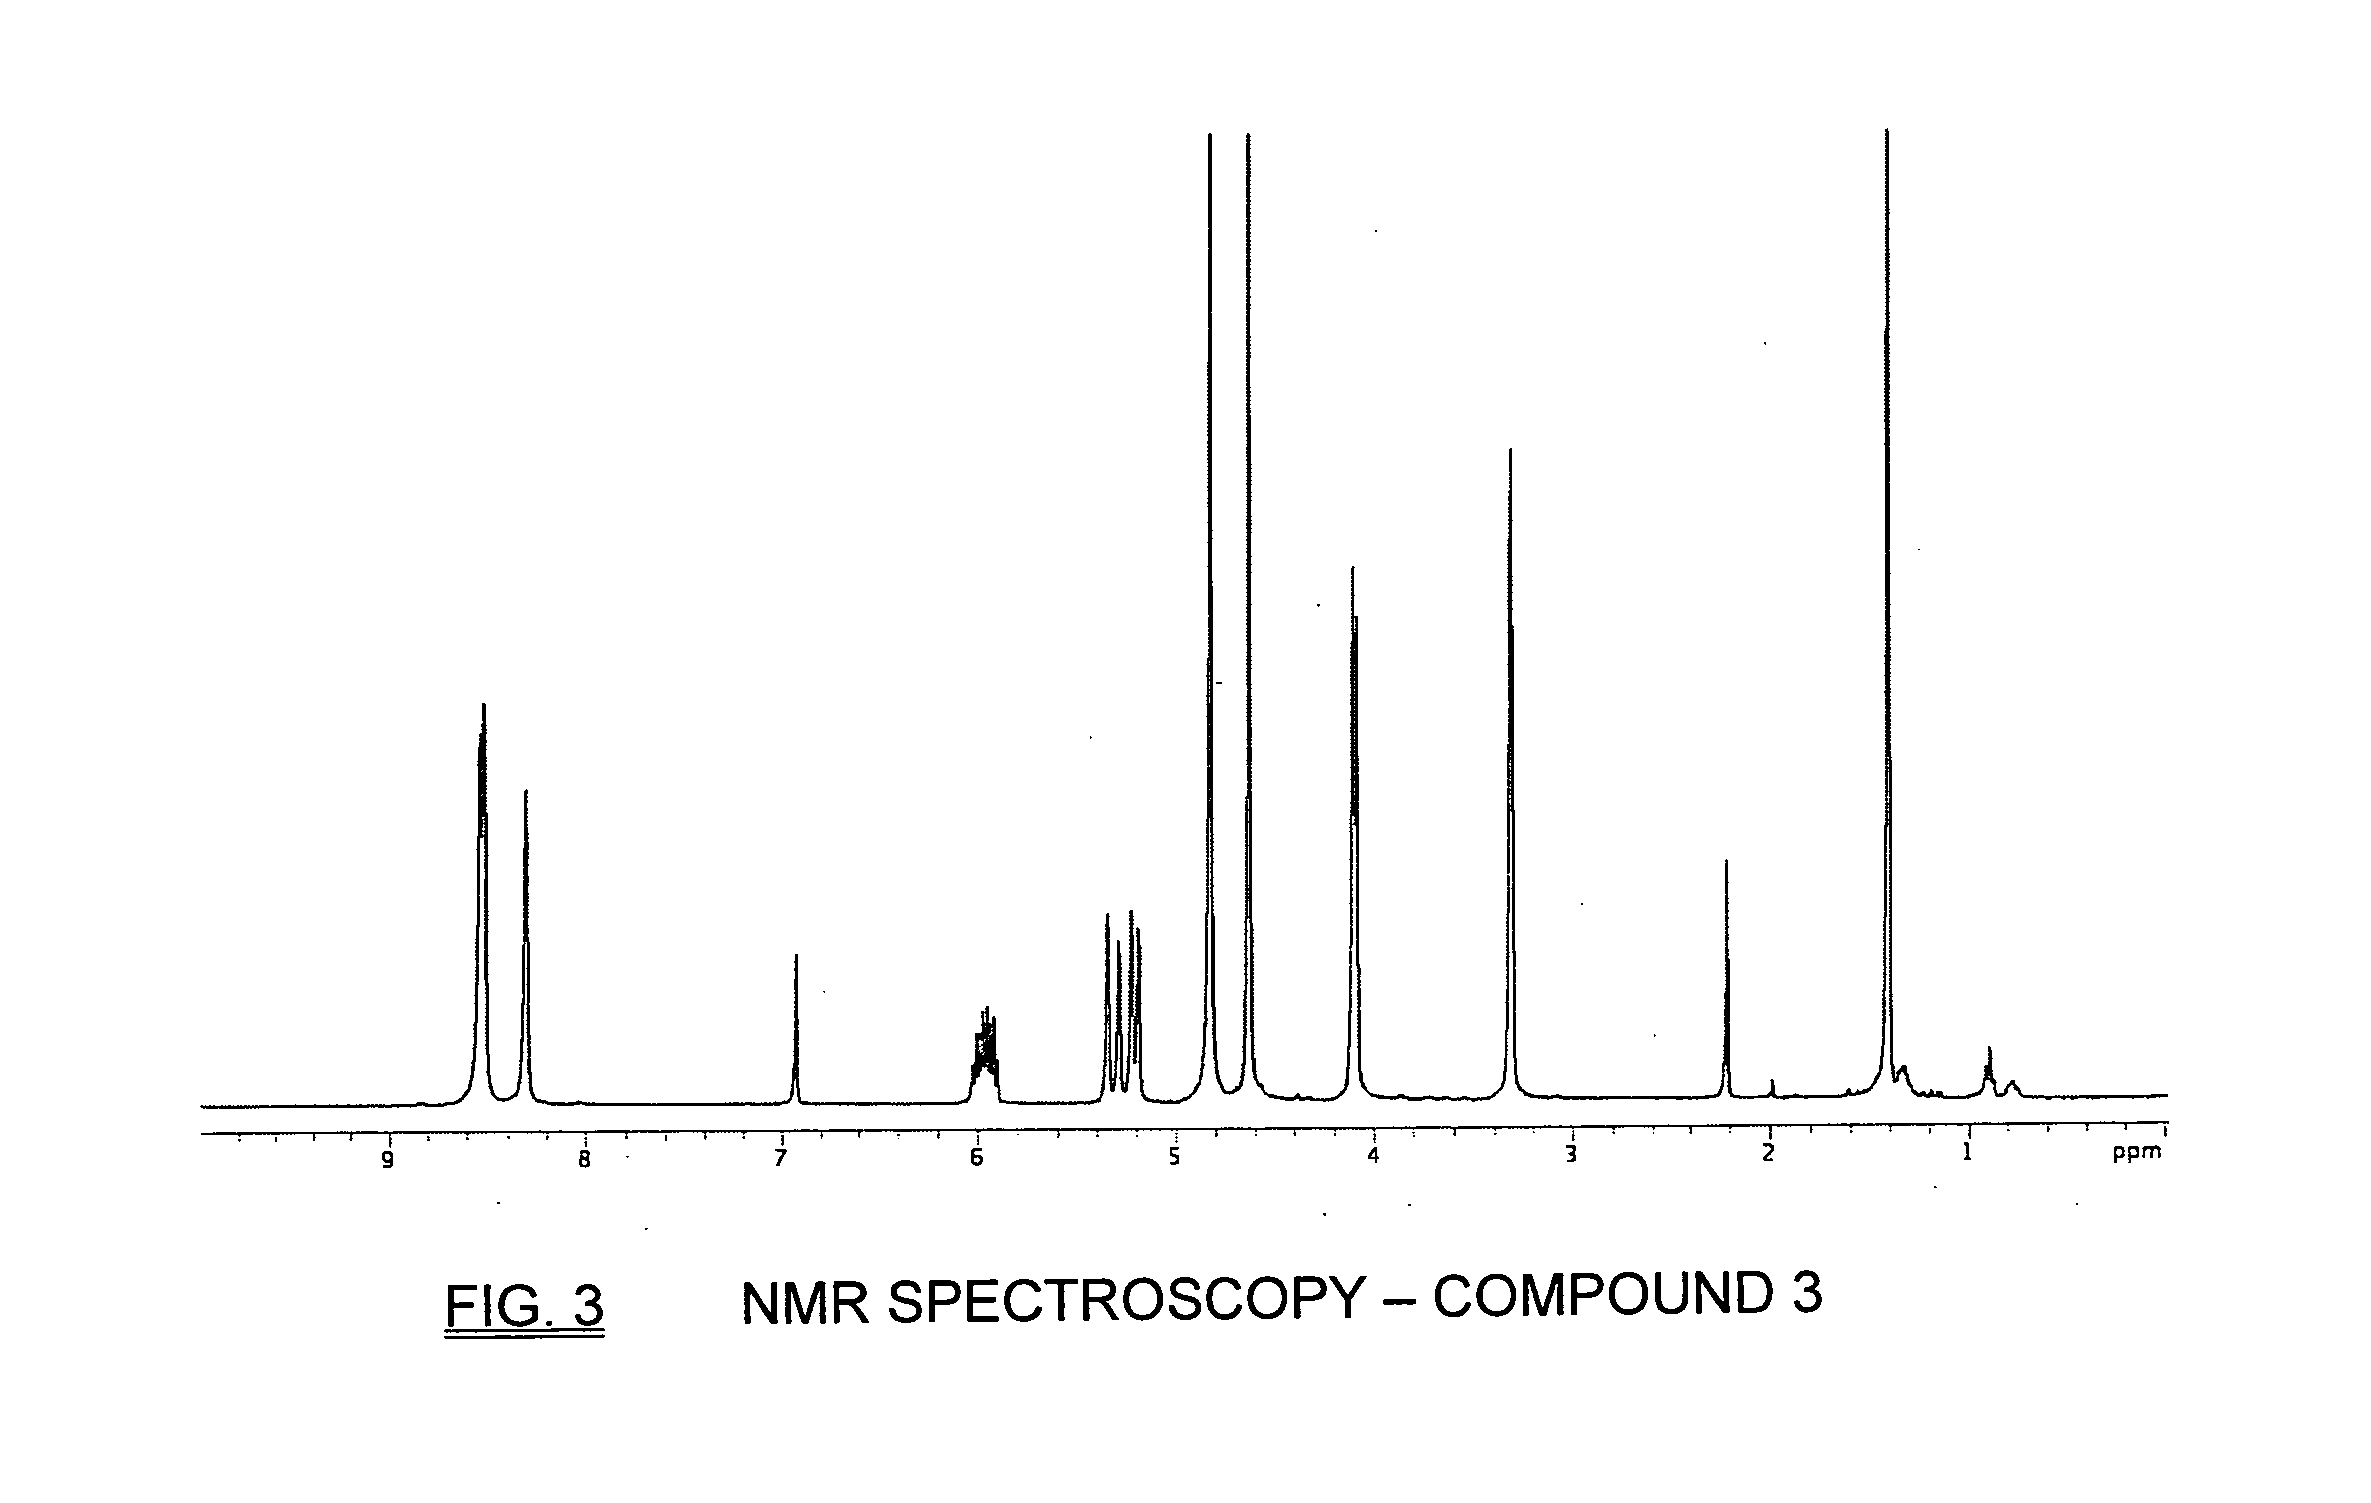 Optical device and method for non-invasive real-time testing of blood sugar levels